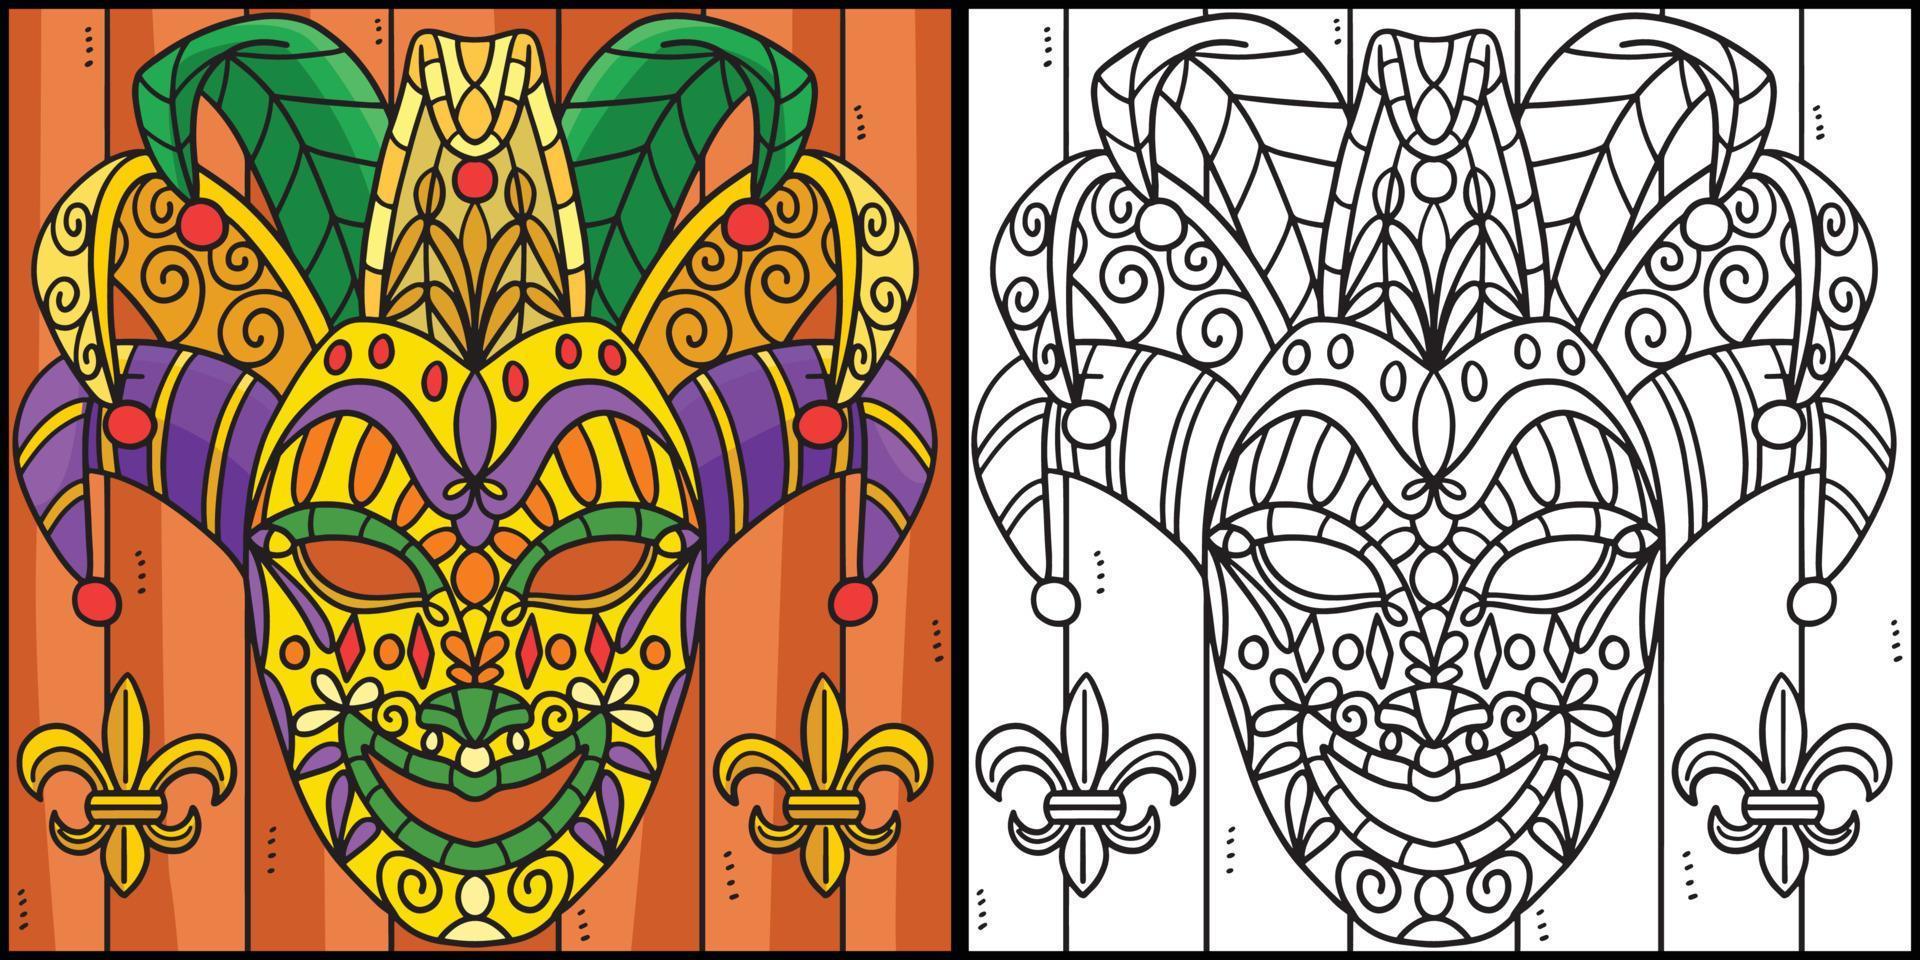 Mardi Gras Jester Mask Coloring Page Illustration vector